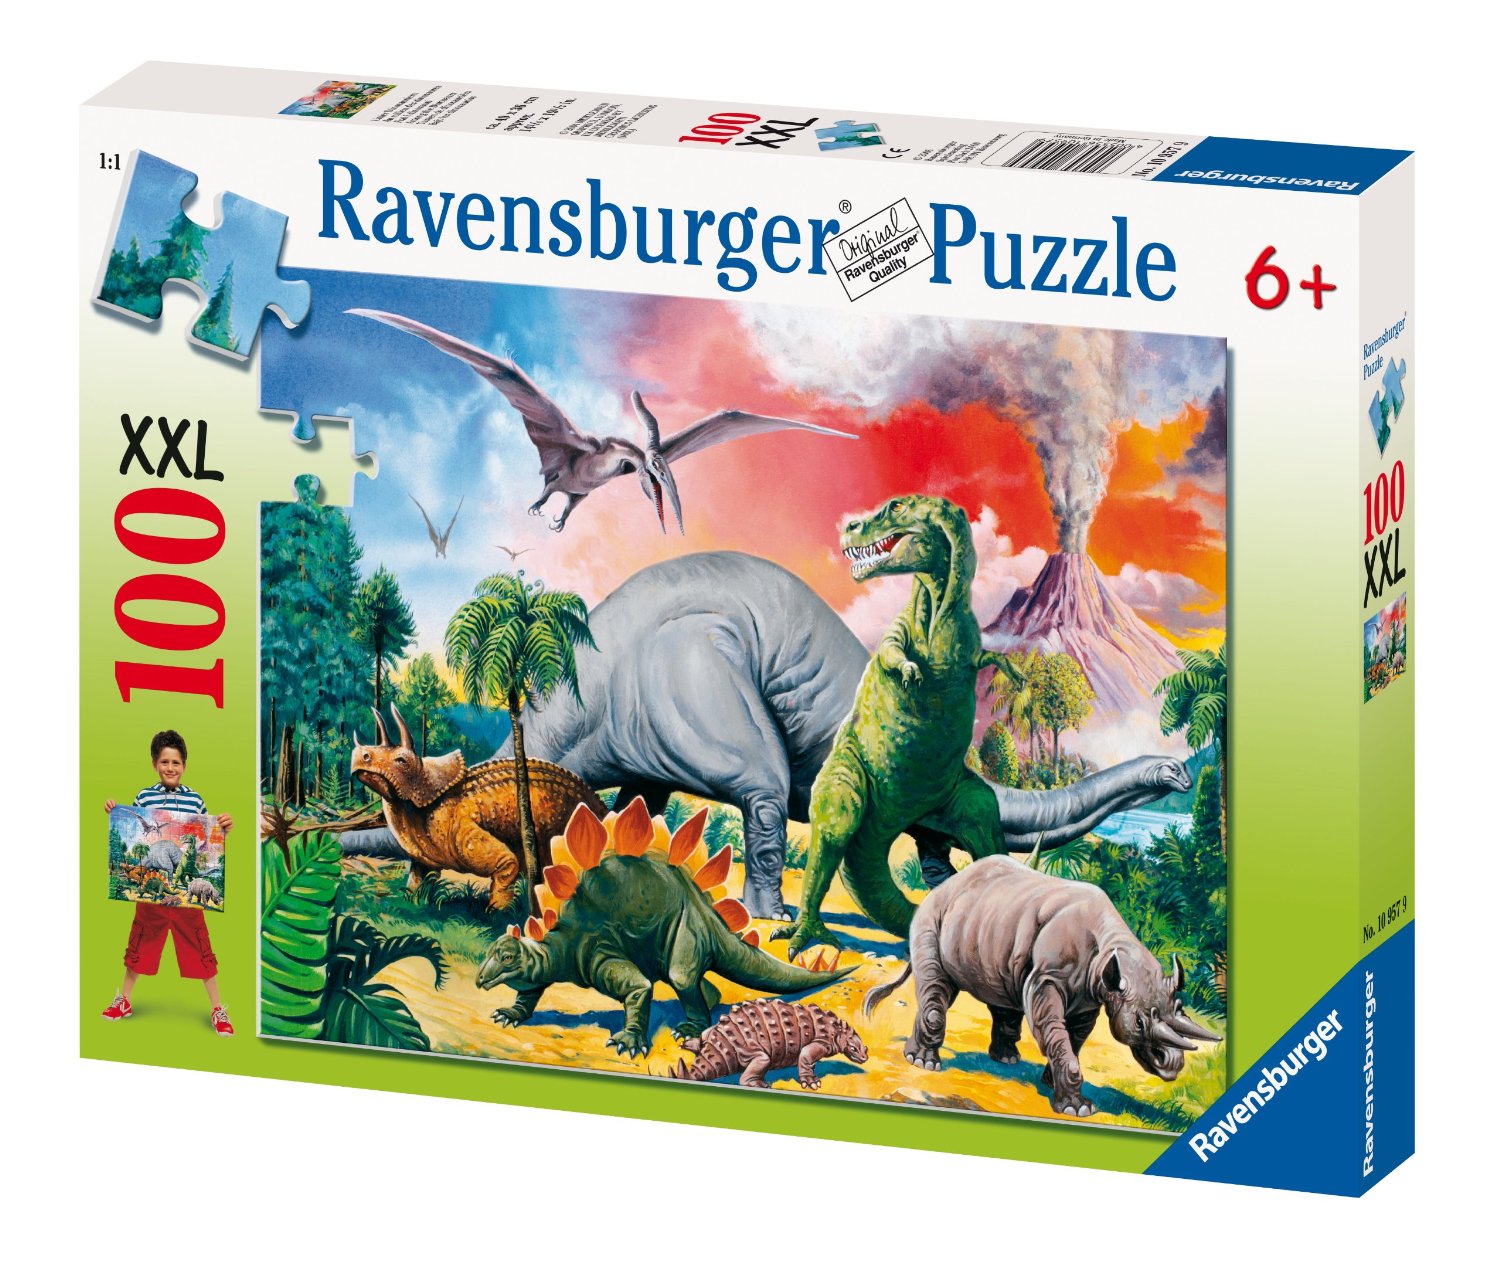 Jigsaw Puzzle - 100 Pieces - Maxi - With the Dinosaurs Ravensburger-10957 100 pieces ...1500 x 1283